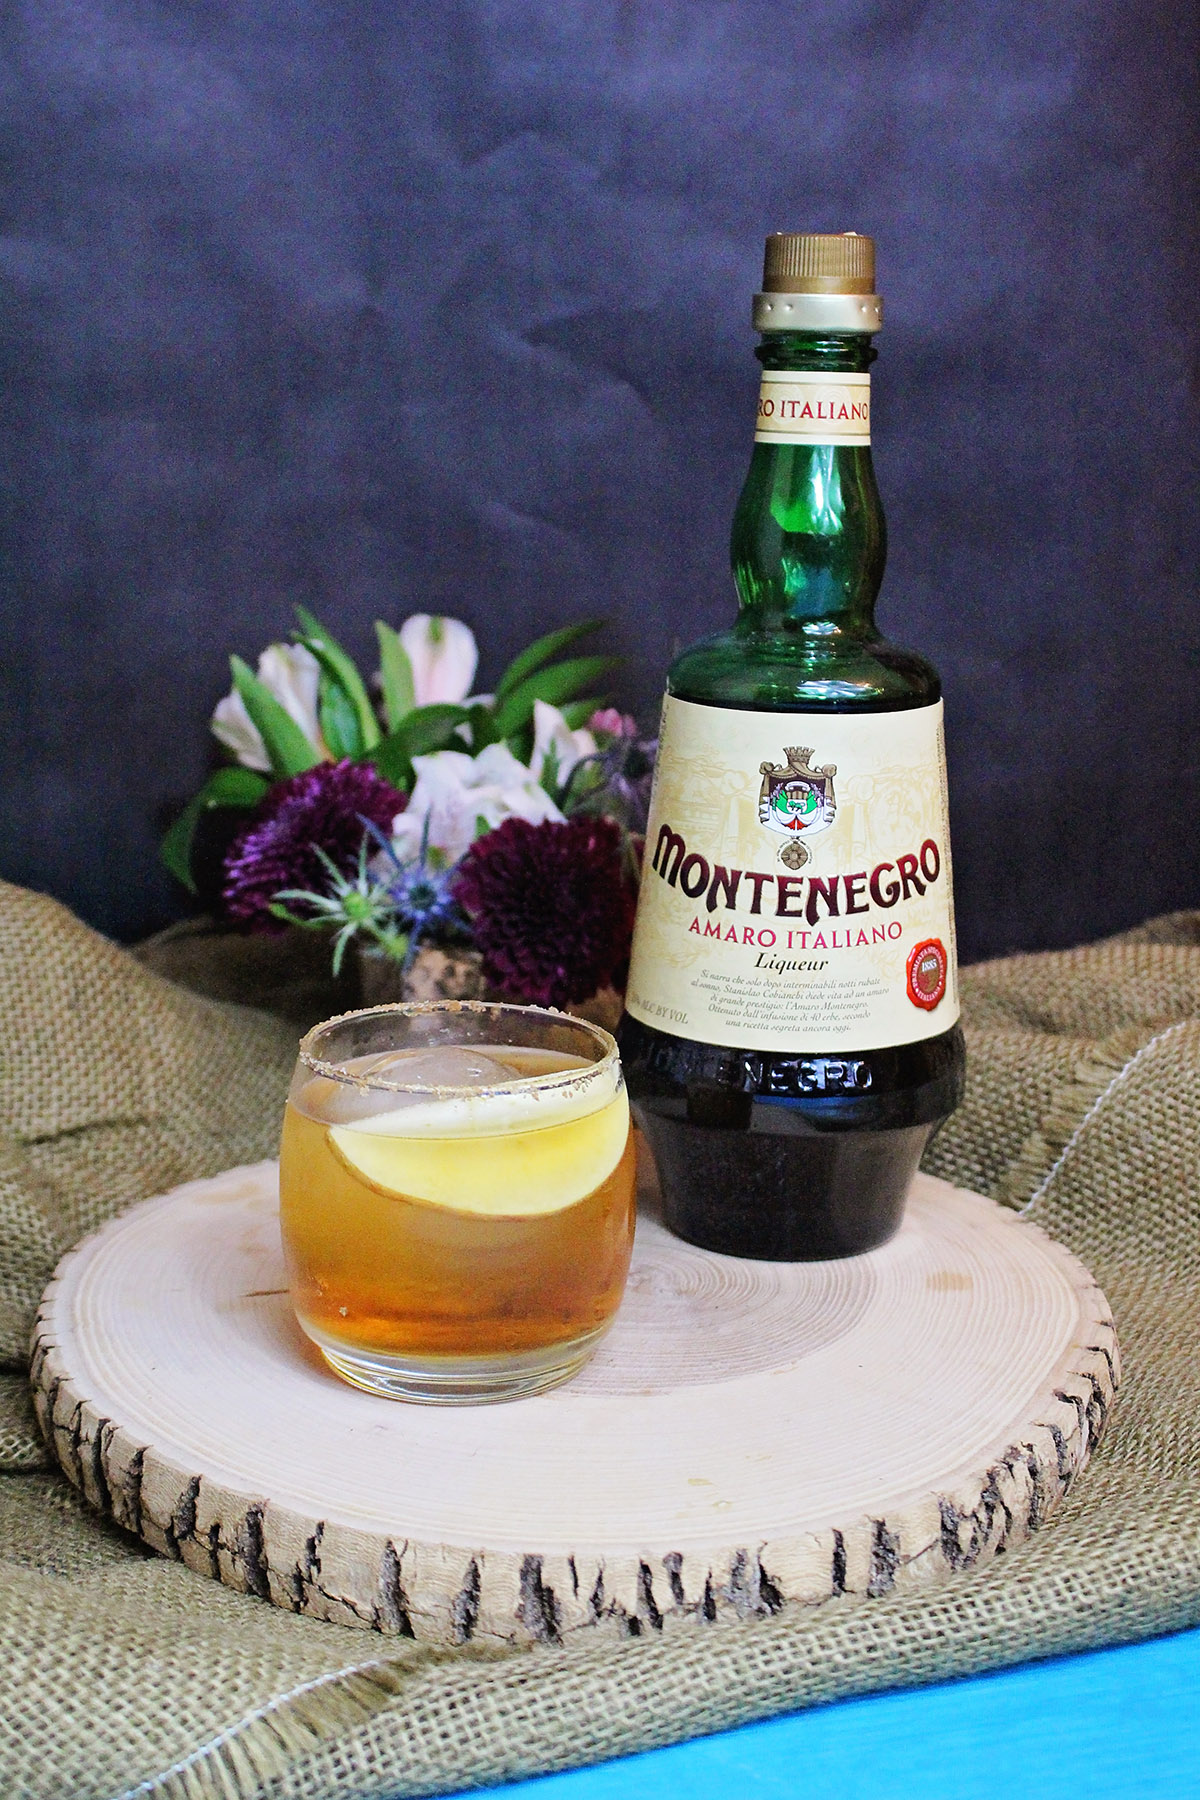 Fall Cocktail with Apple, Bourbon, and Amaro Montenegro